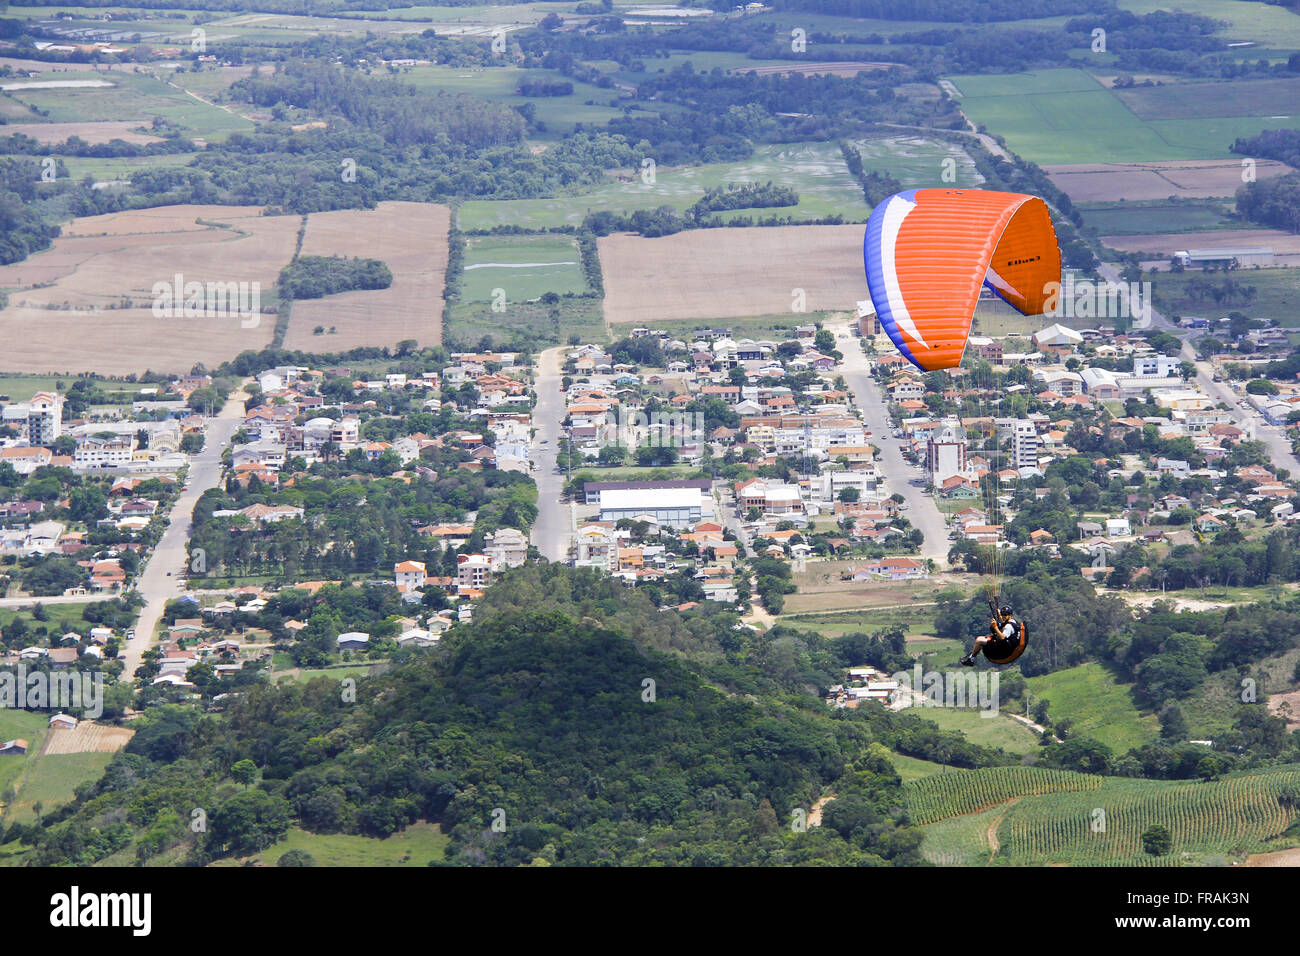 Paragliding in competion free flight over the city Stock Photo